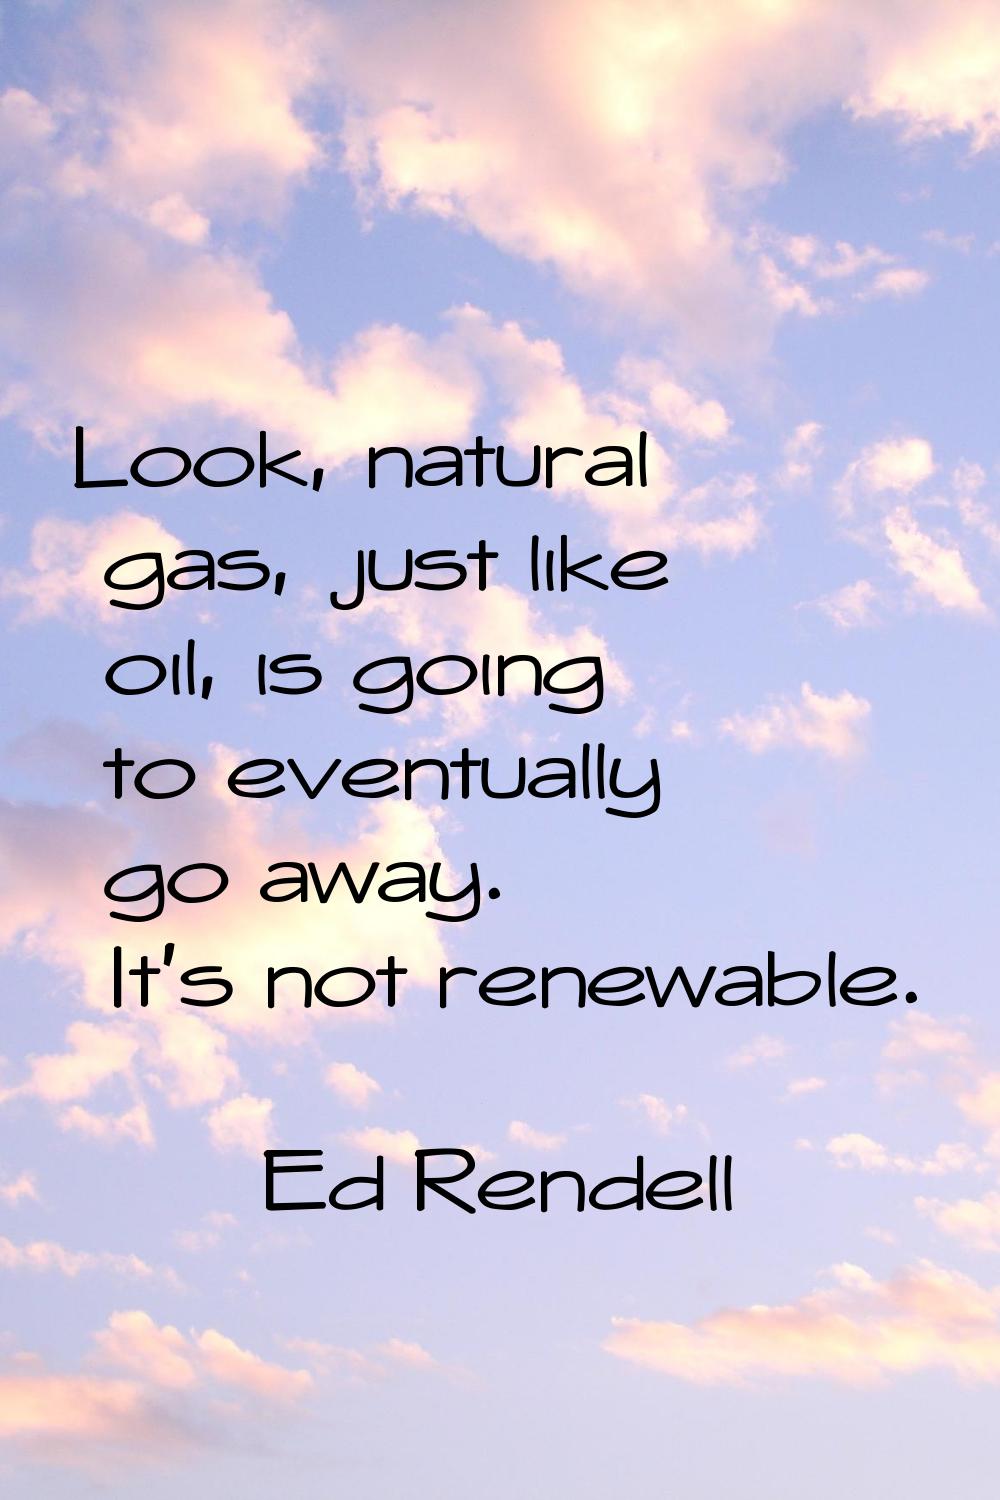 Look, natural gas, just like oil, is going to eventually go away. It's not renewable.